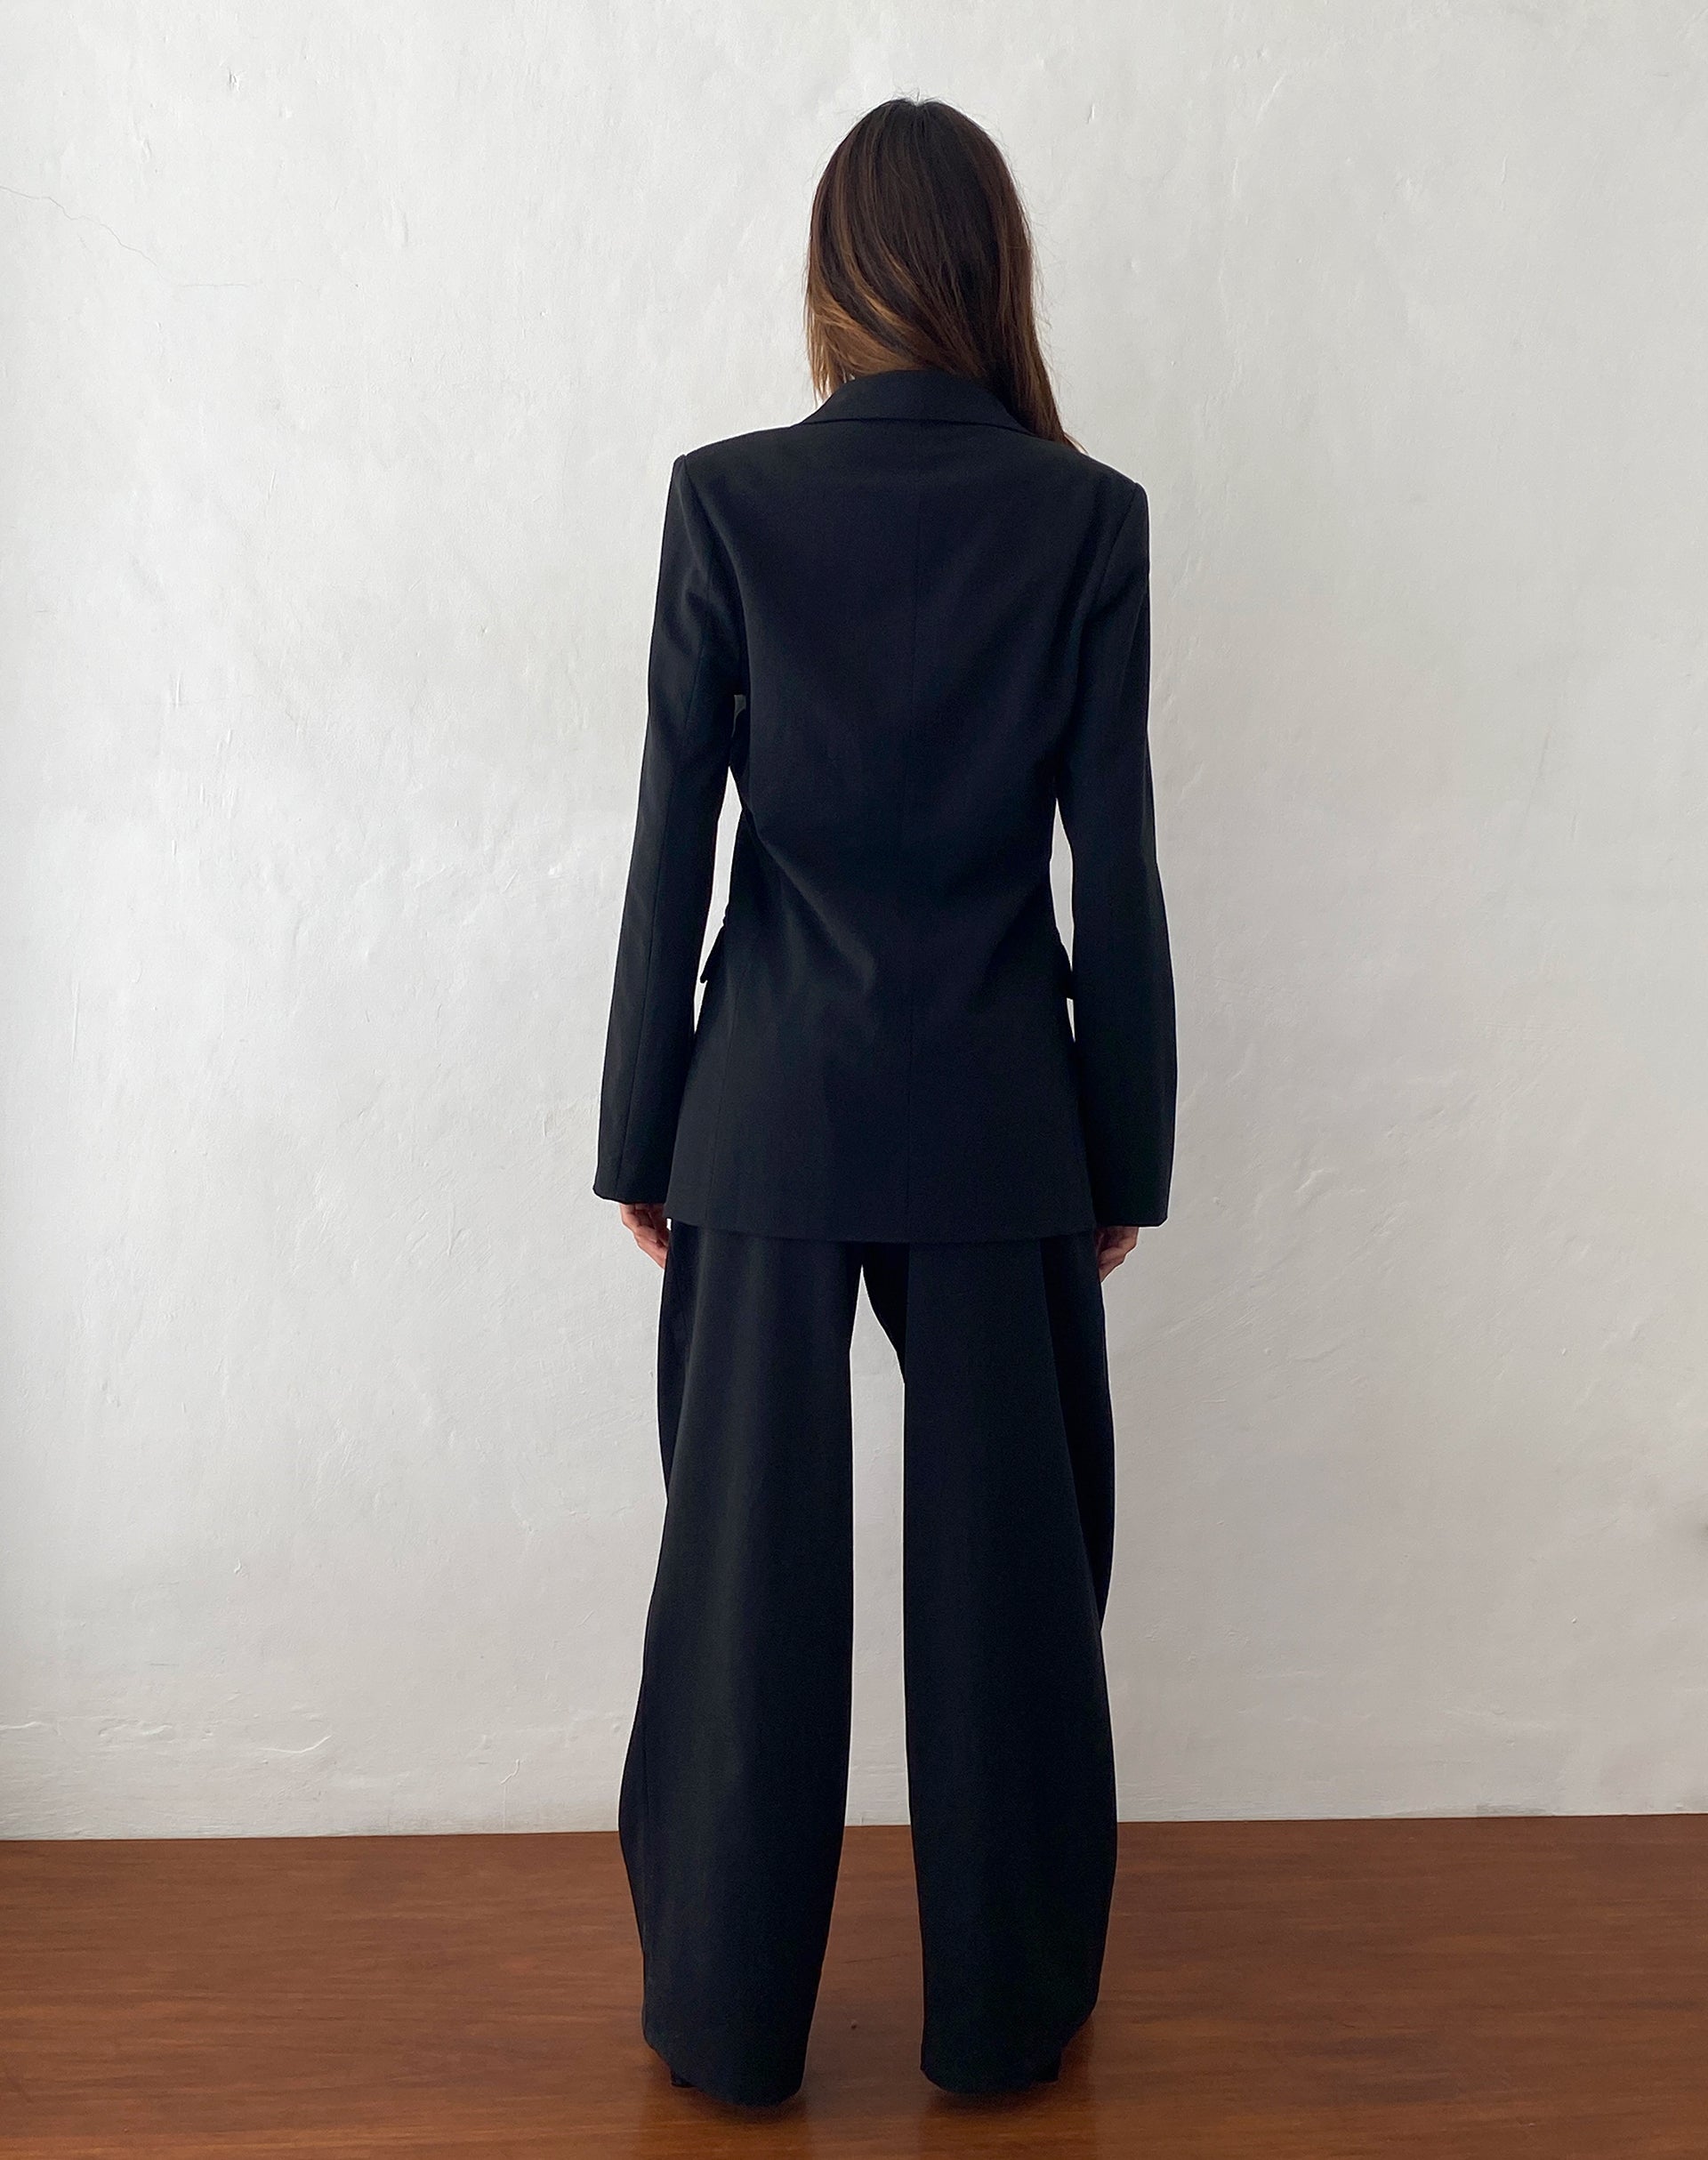 Image of Nailaka Low Rise Wide Leg Tailored Trouser in Black